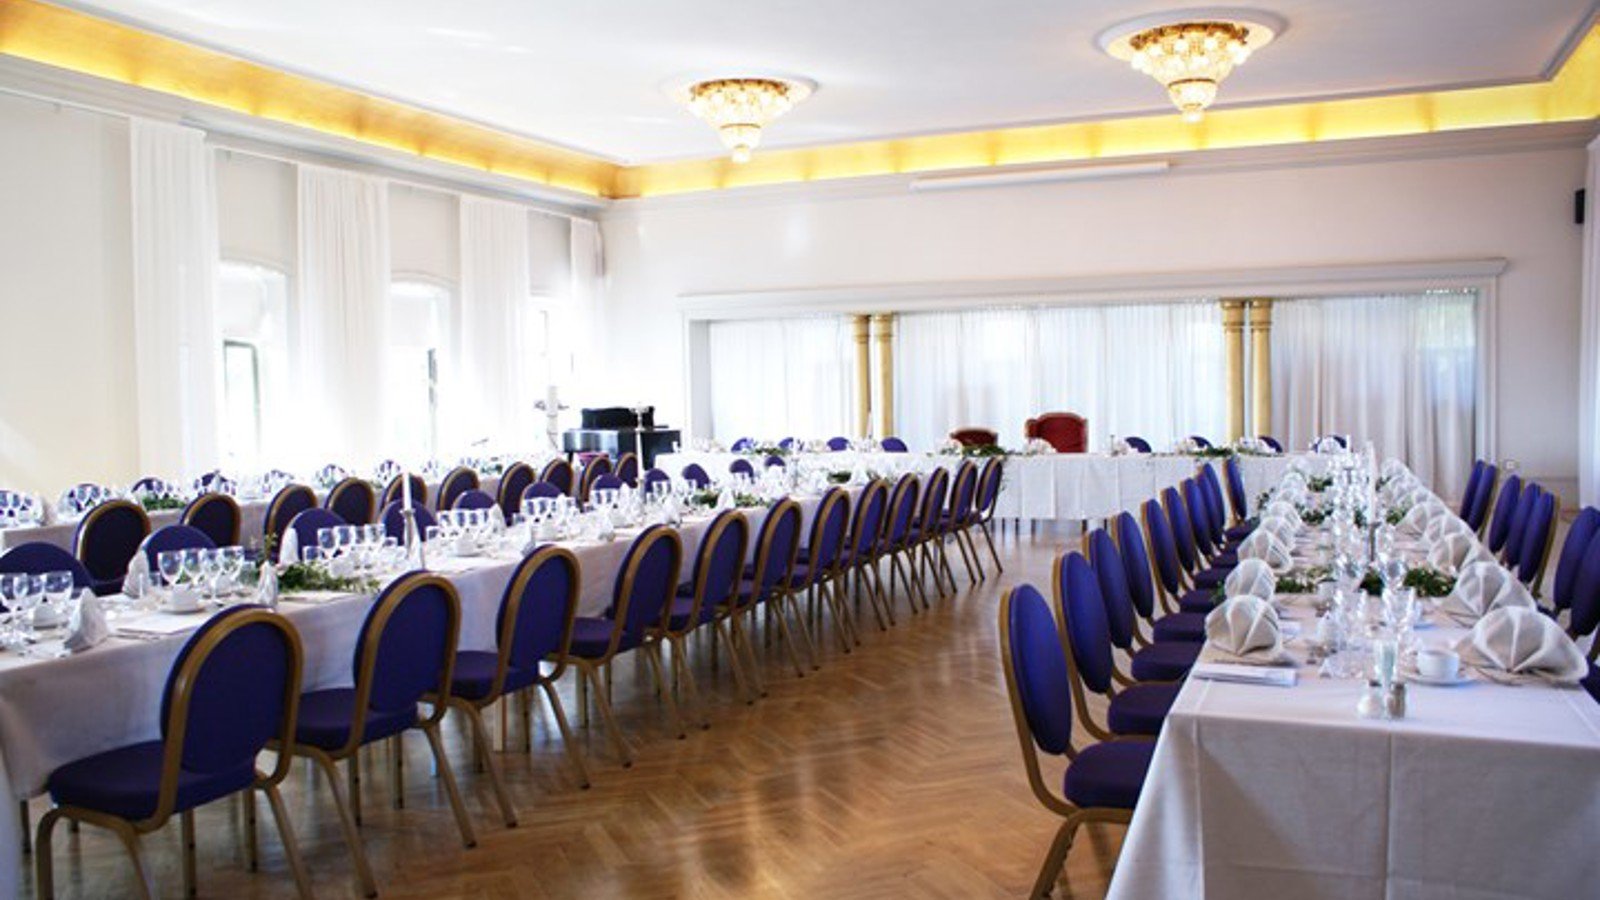 Room with long tables, white tablecloths and large windows